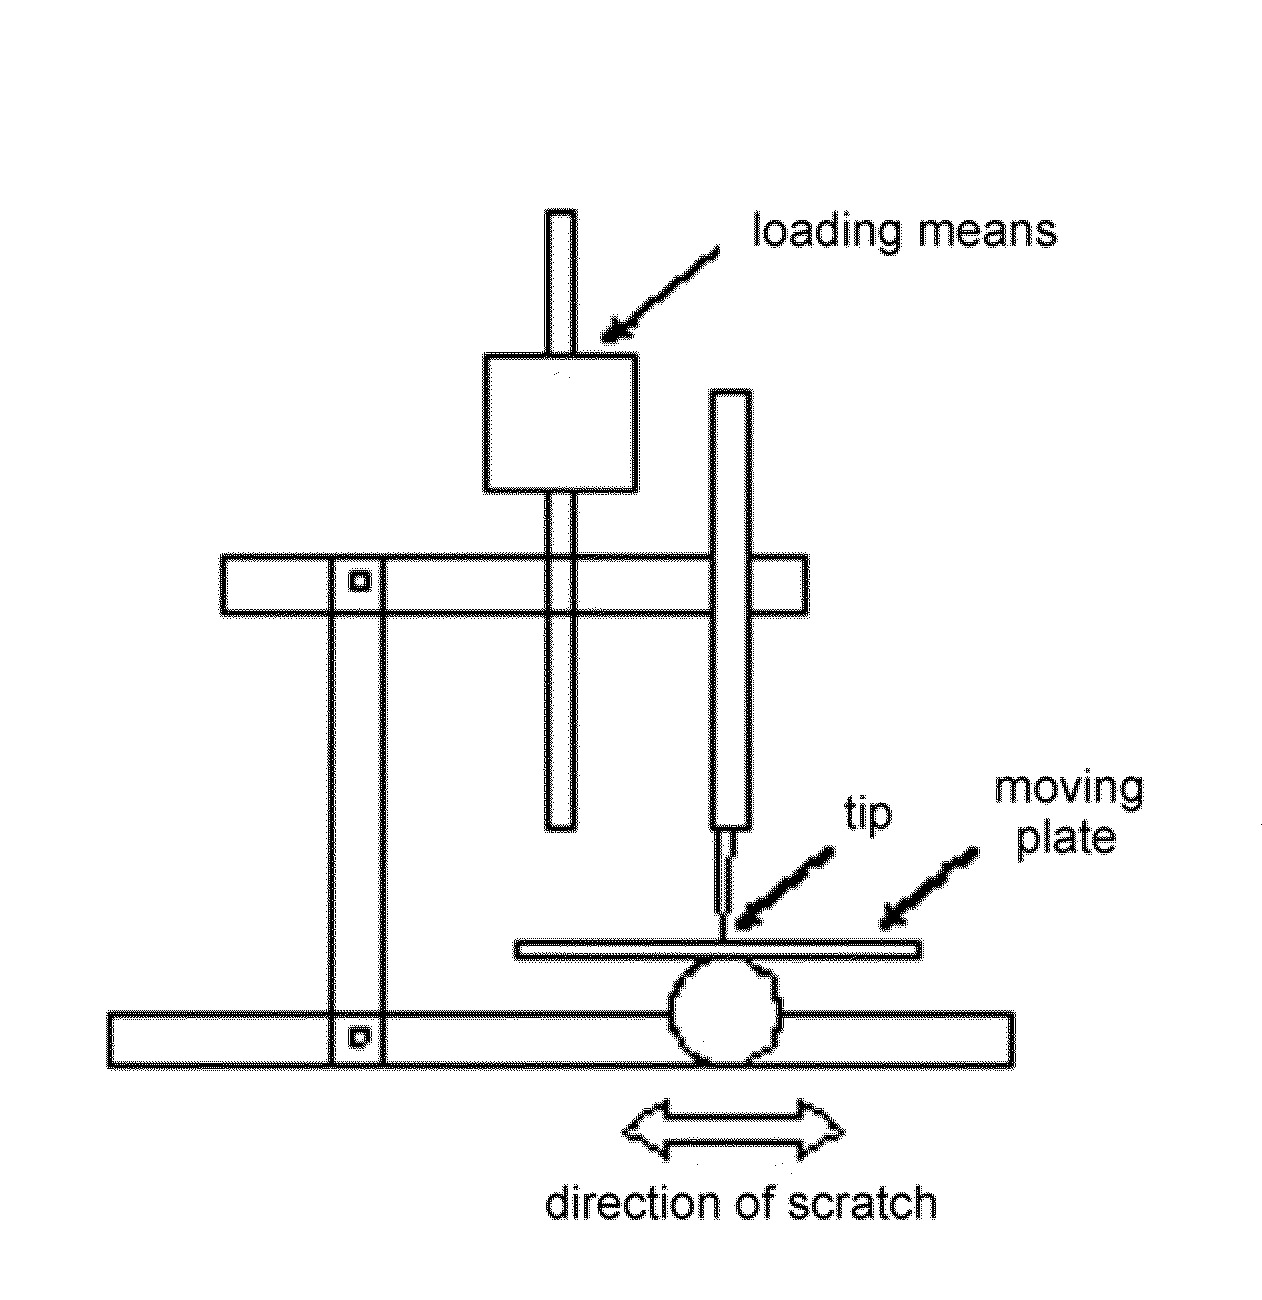 Method for Evaluating Scratch Resistance of Plastic Resins